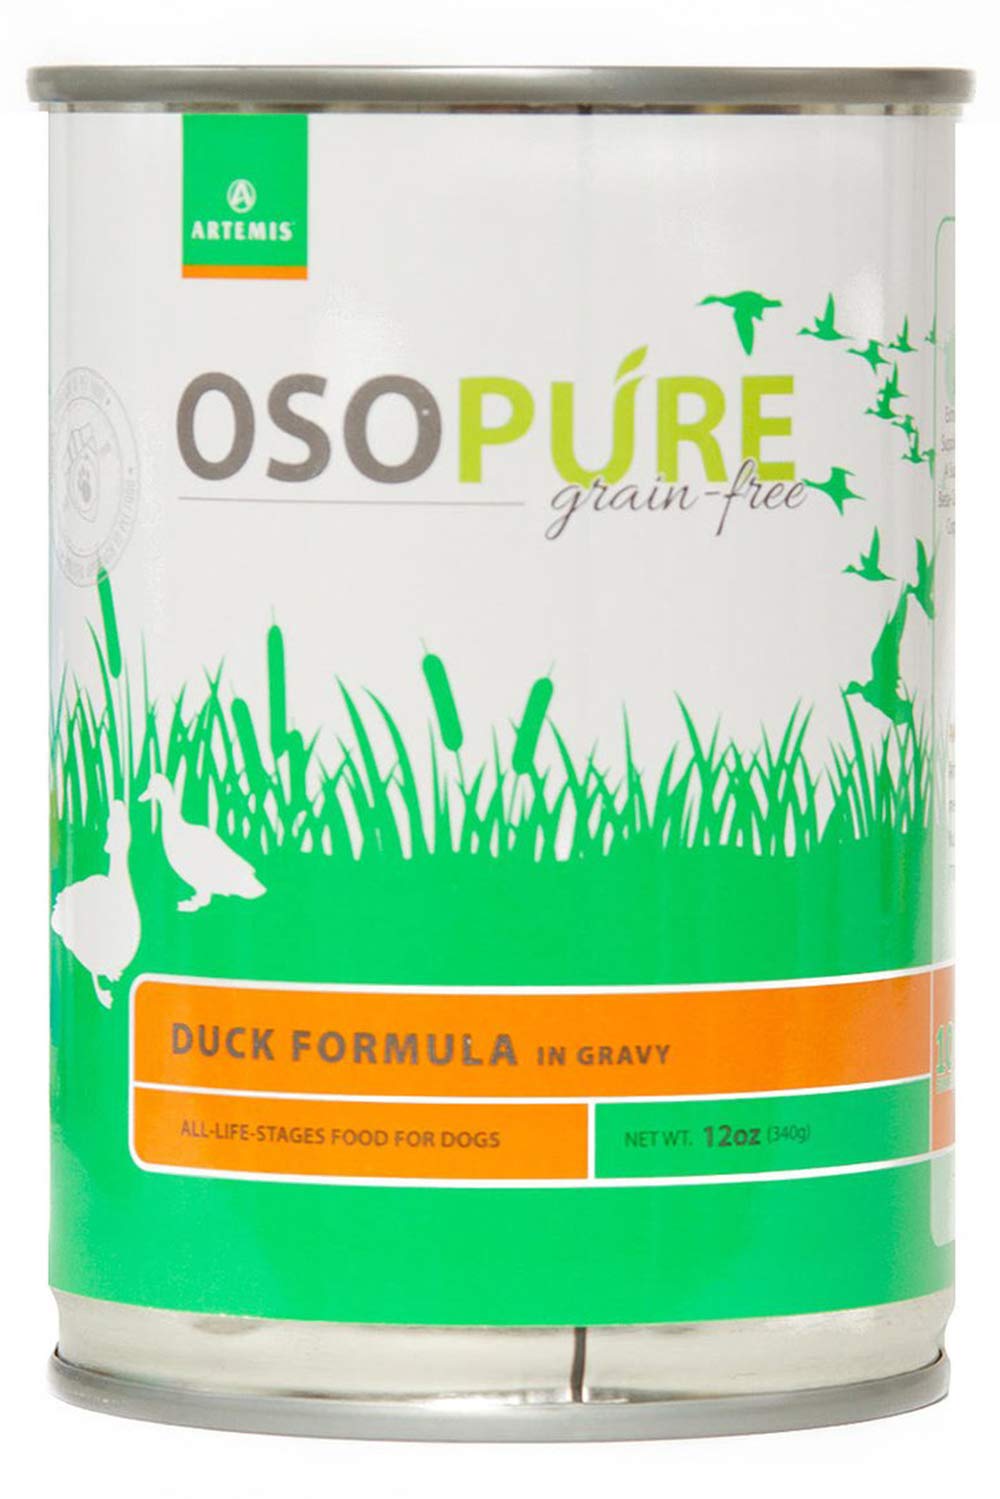 Artemis Wet Canned Gravy Dog Food - OSOPURE Grain Free Limited Ingredient Duck Formula Protein Health Nutrition All Life Stages Case of 12 Cans